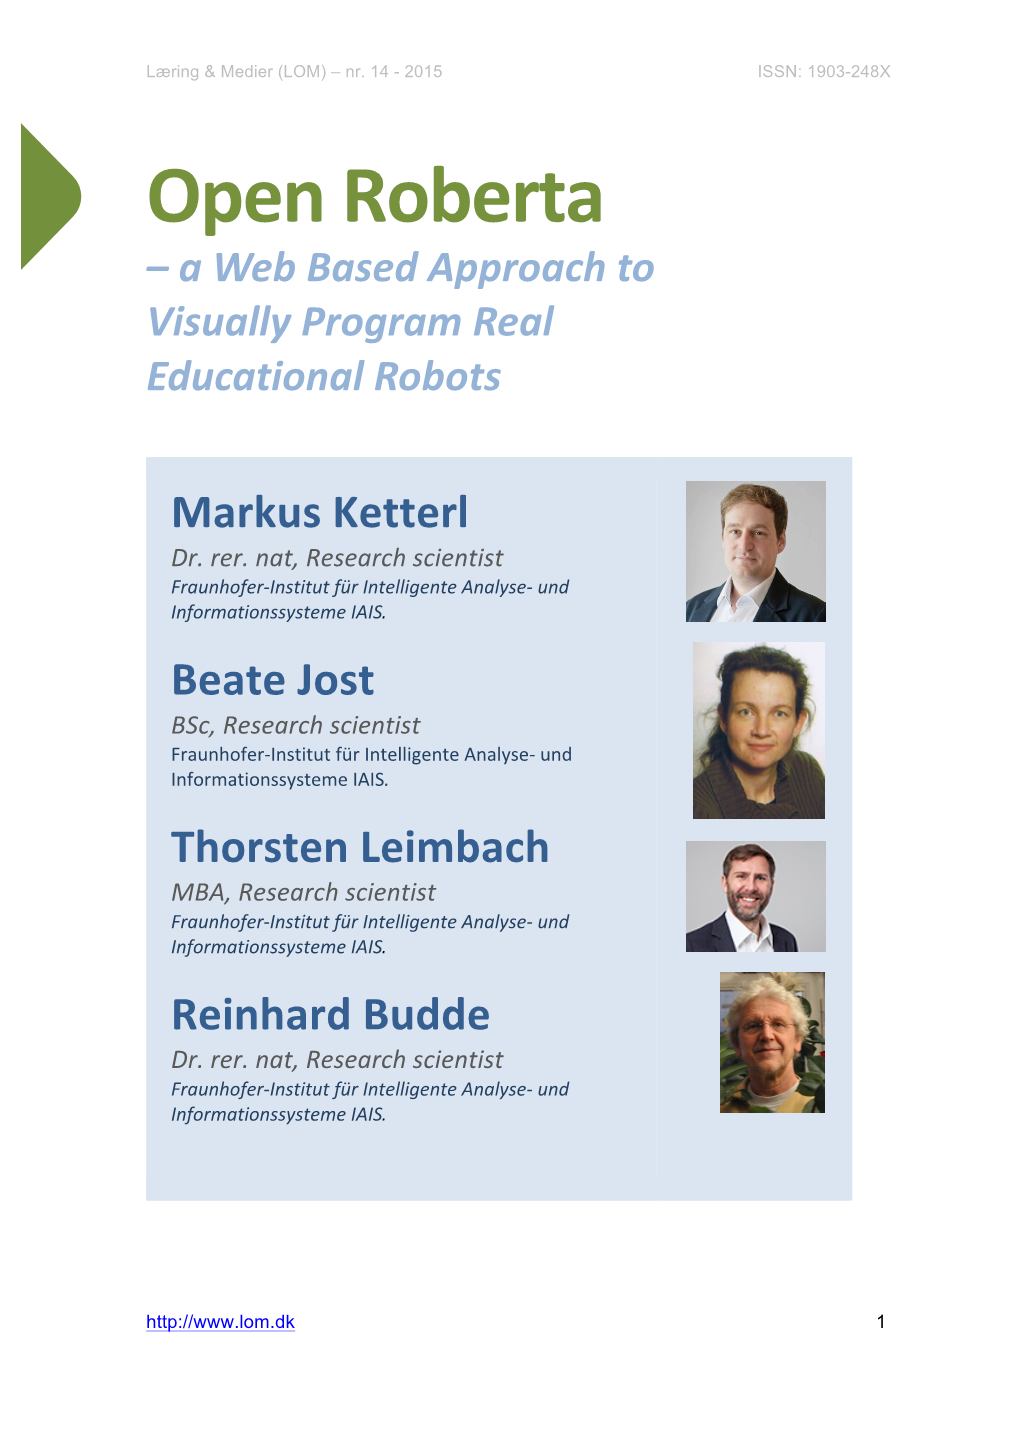 Open Roberta – a Web Based Approach to Visually Program Real Educational Robots